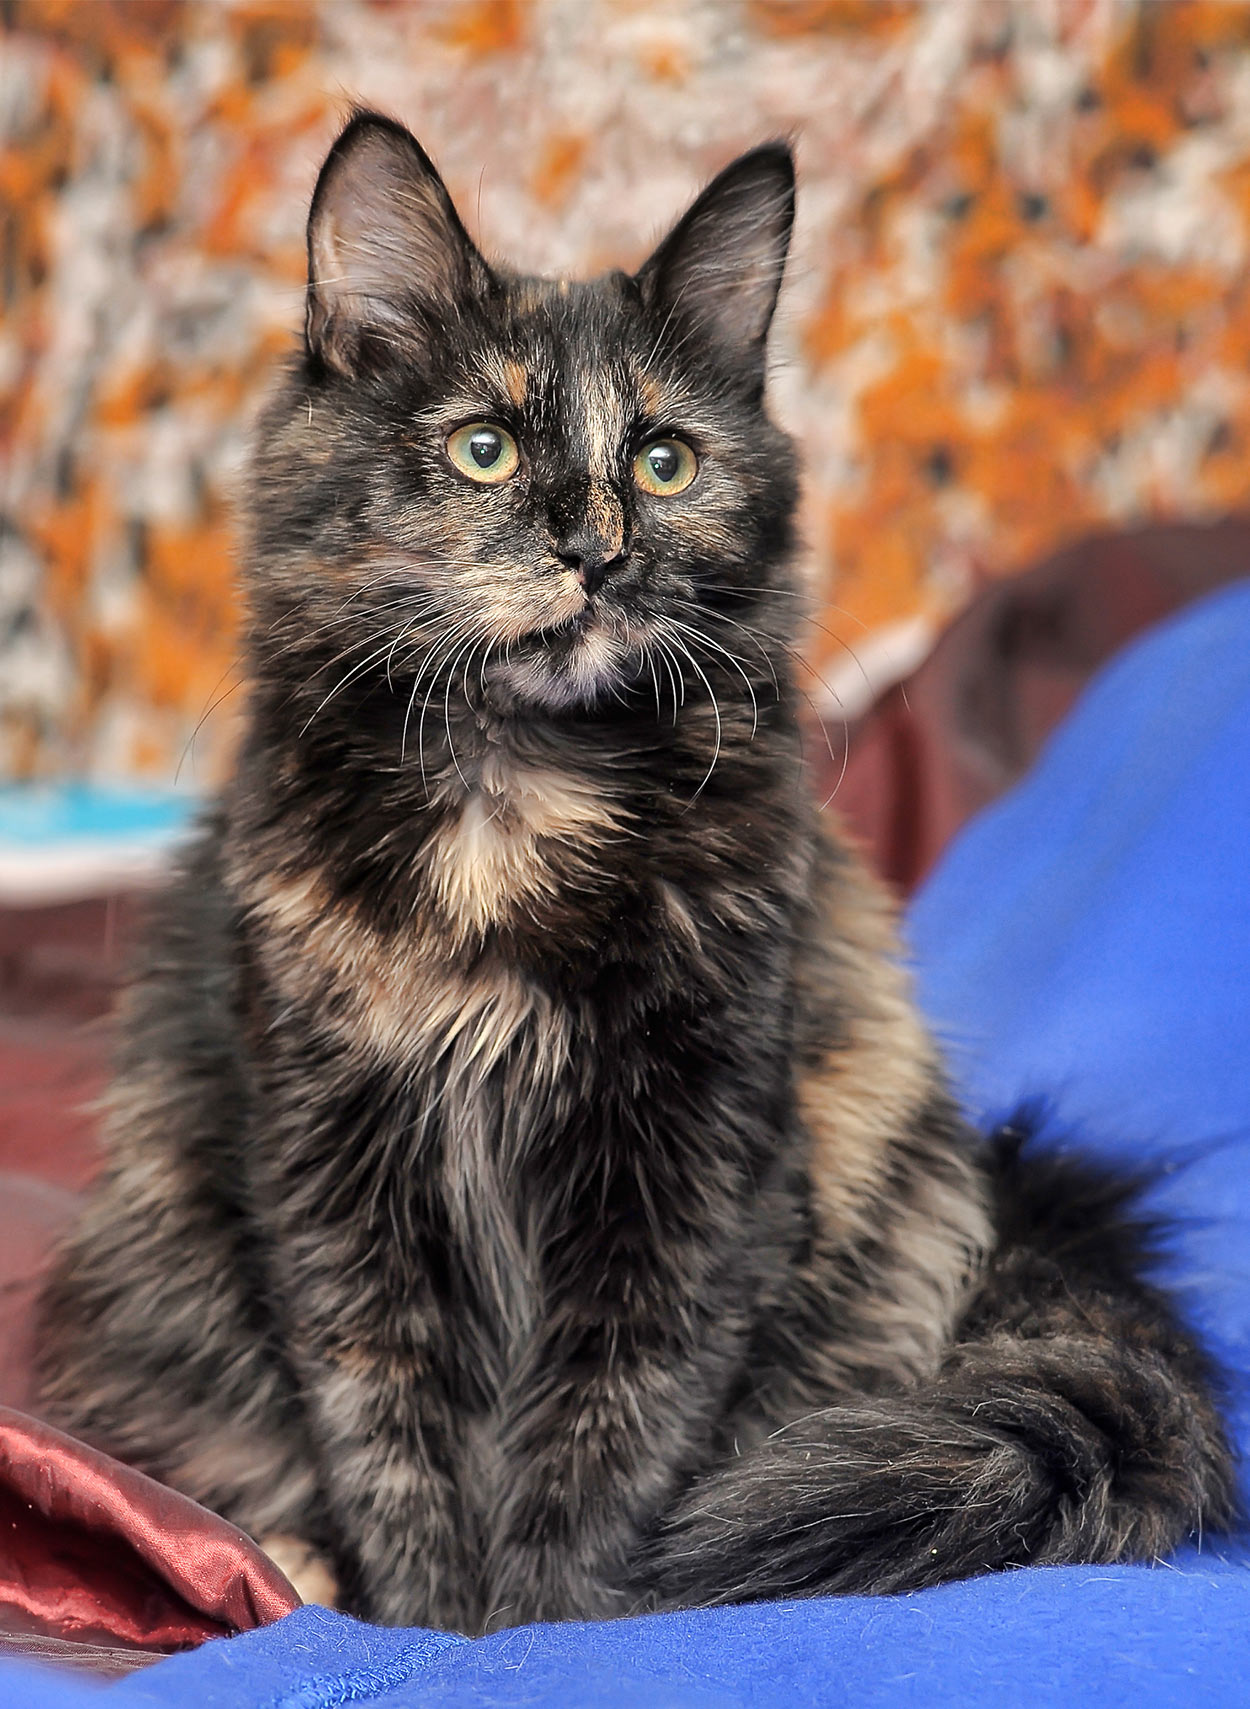 30 Things You Never Knew About The Tortoiseshell Cat